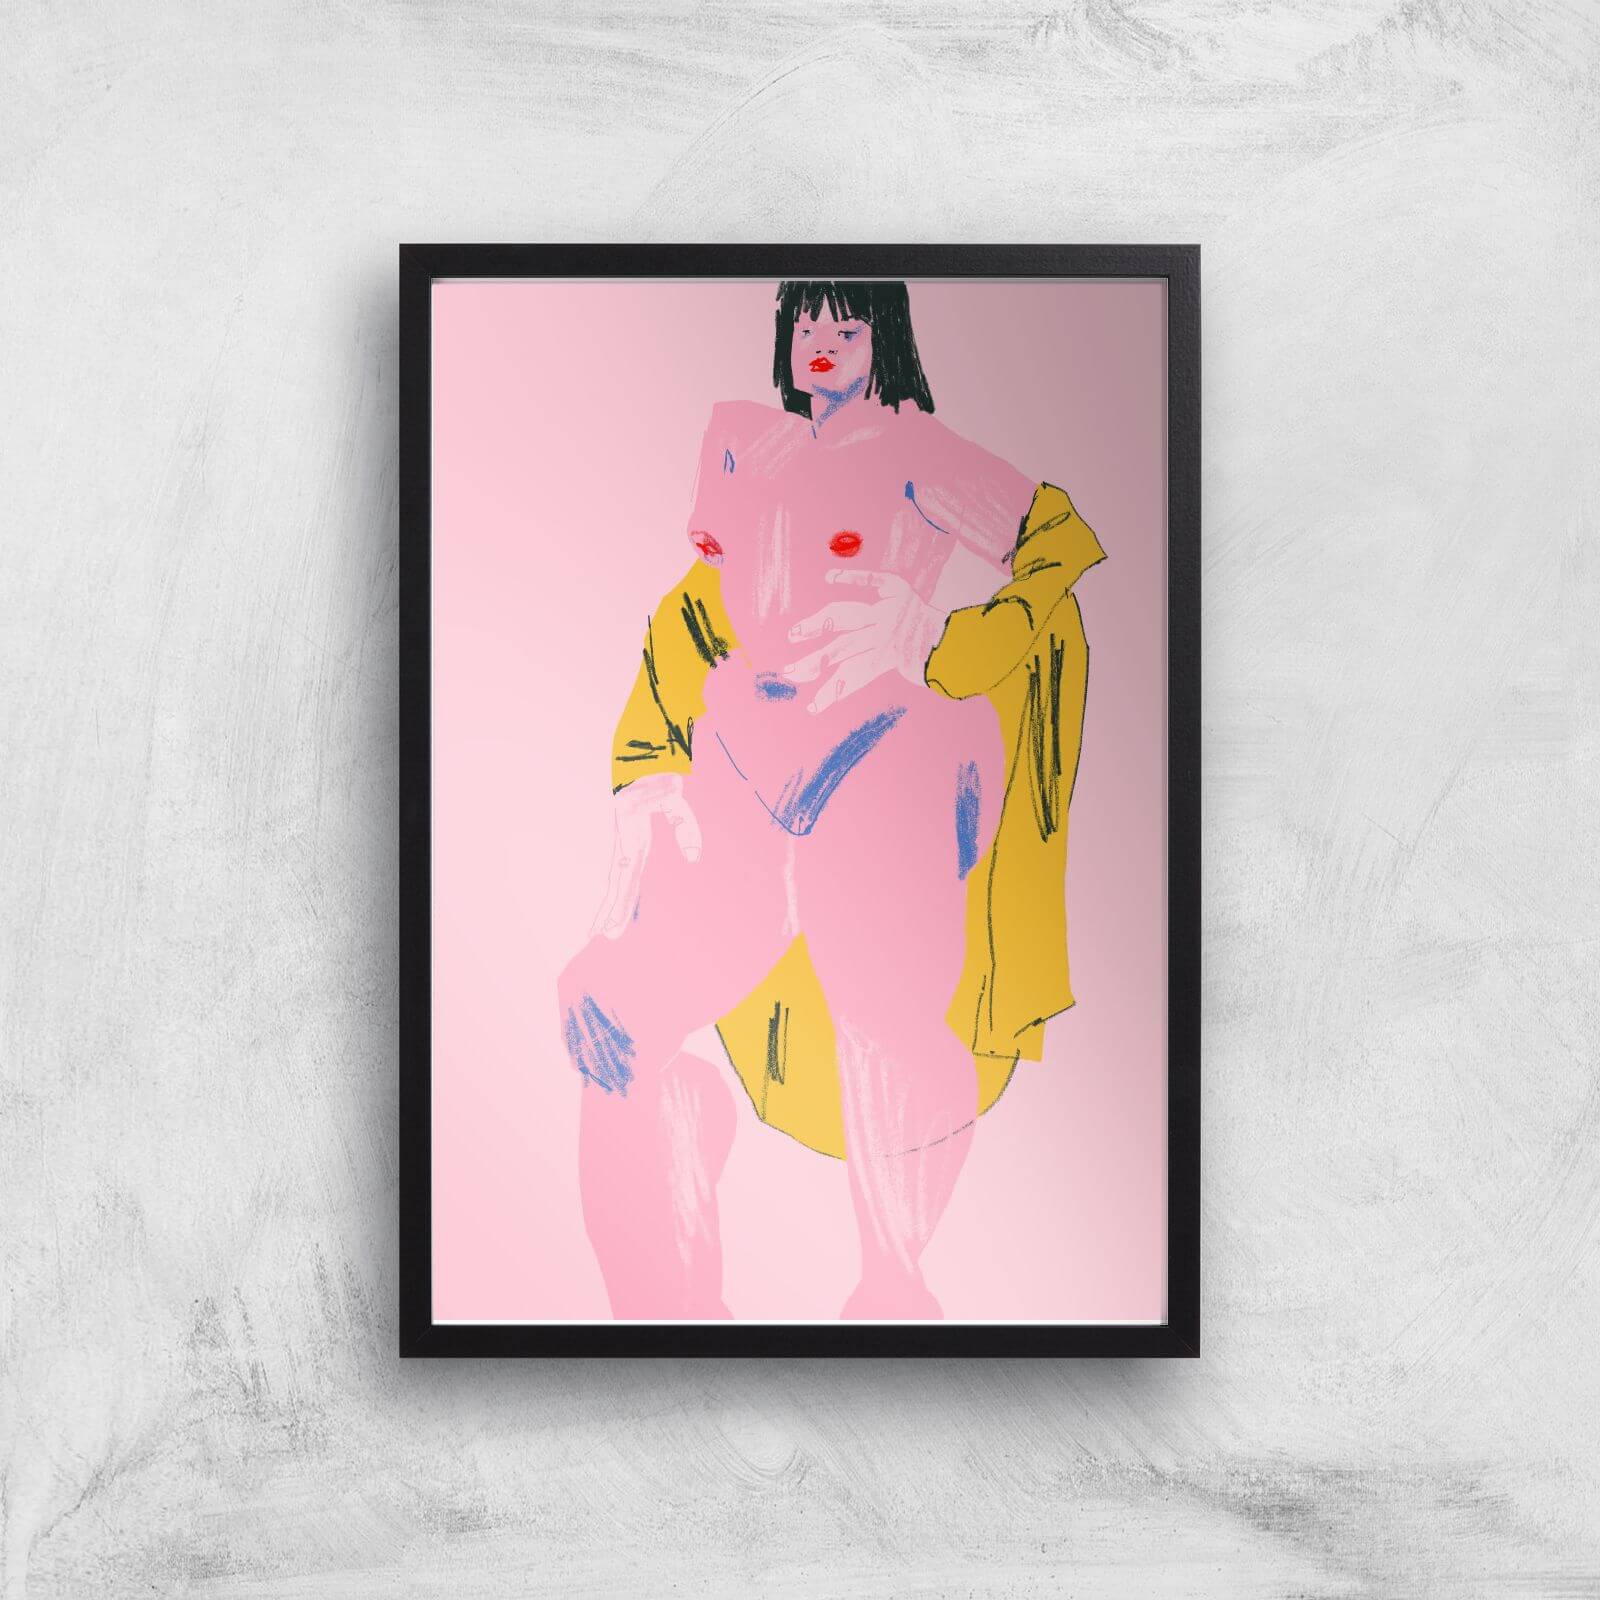 Pink & Yellow Nude Giclee Art Print - A3 - Black Frame